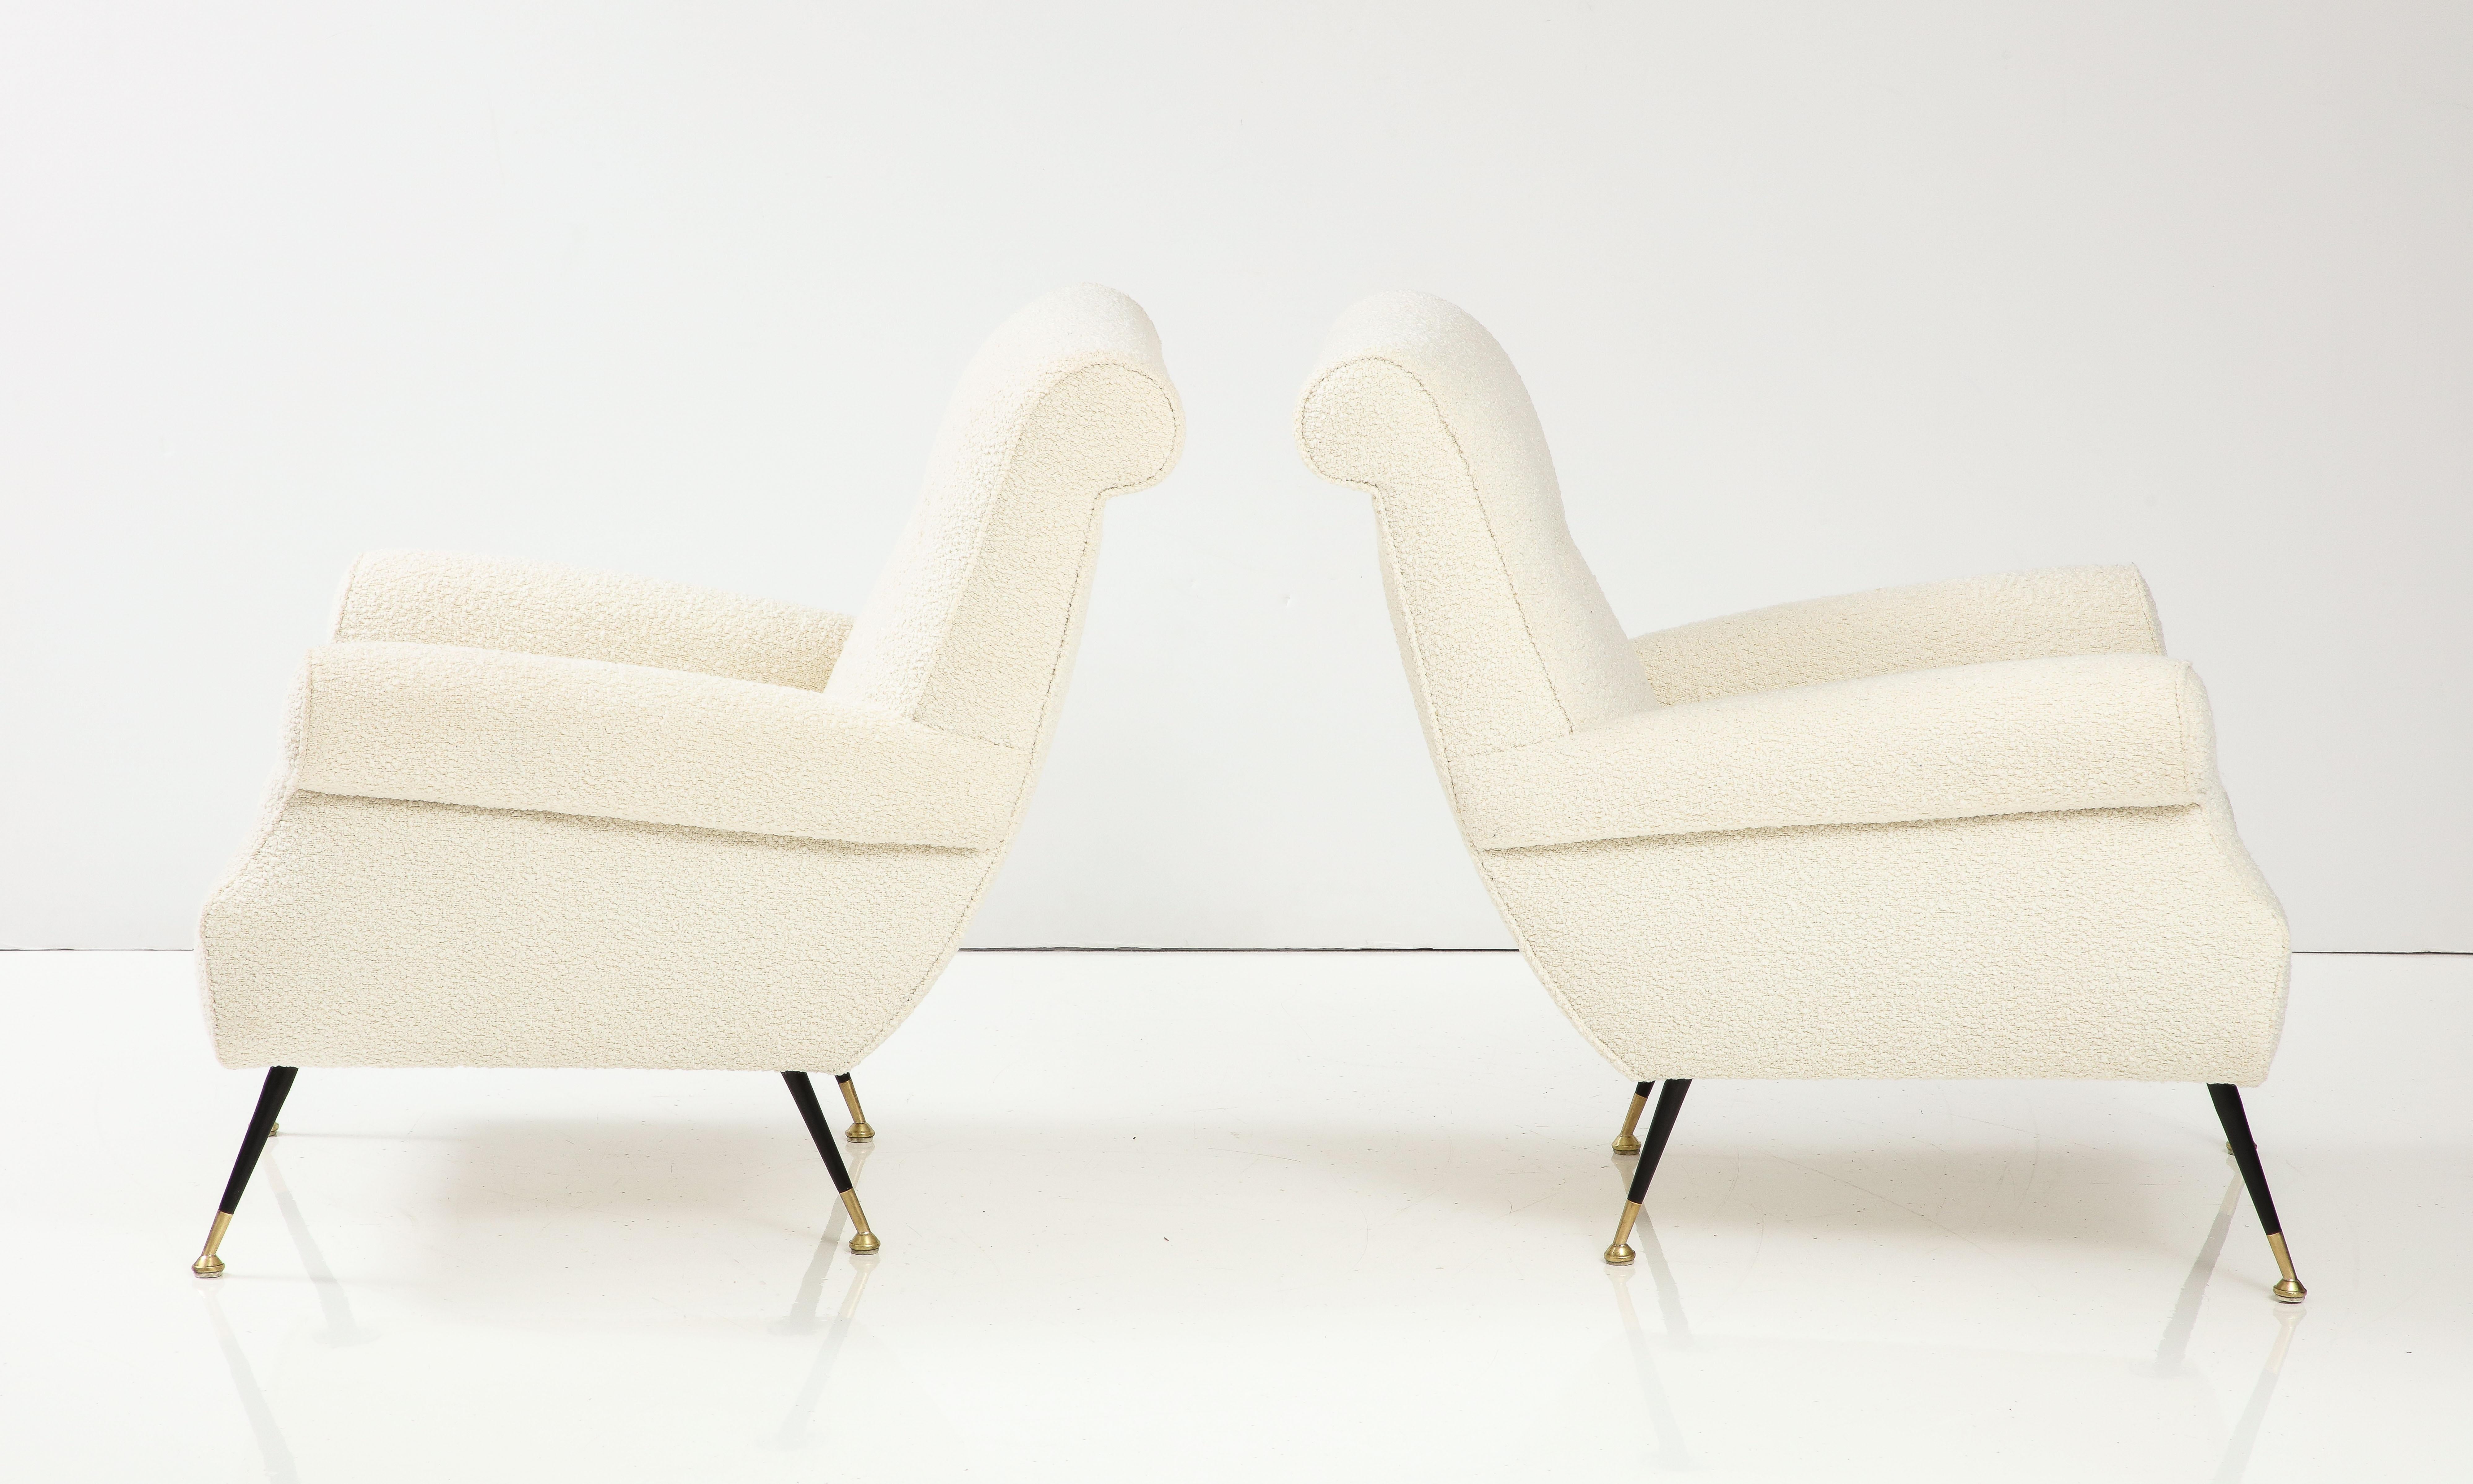 Pair of Italian Modernist Lounge Chairs, Italy, circa 1950 For Sale 1